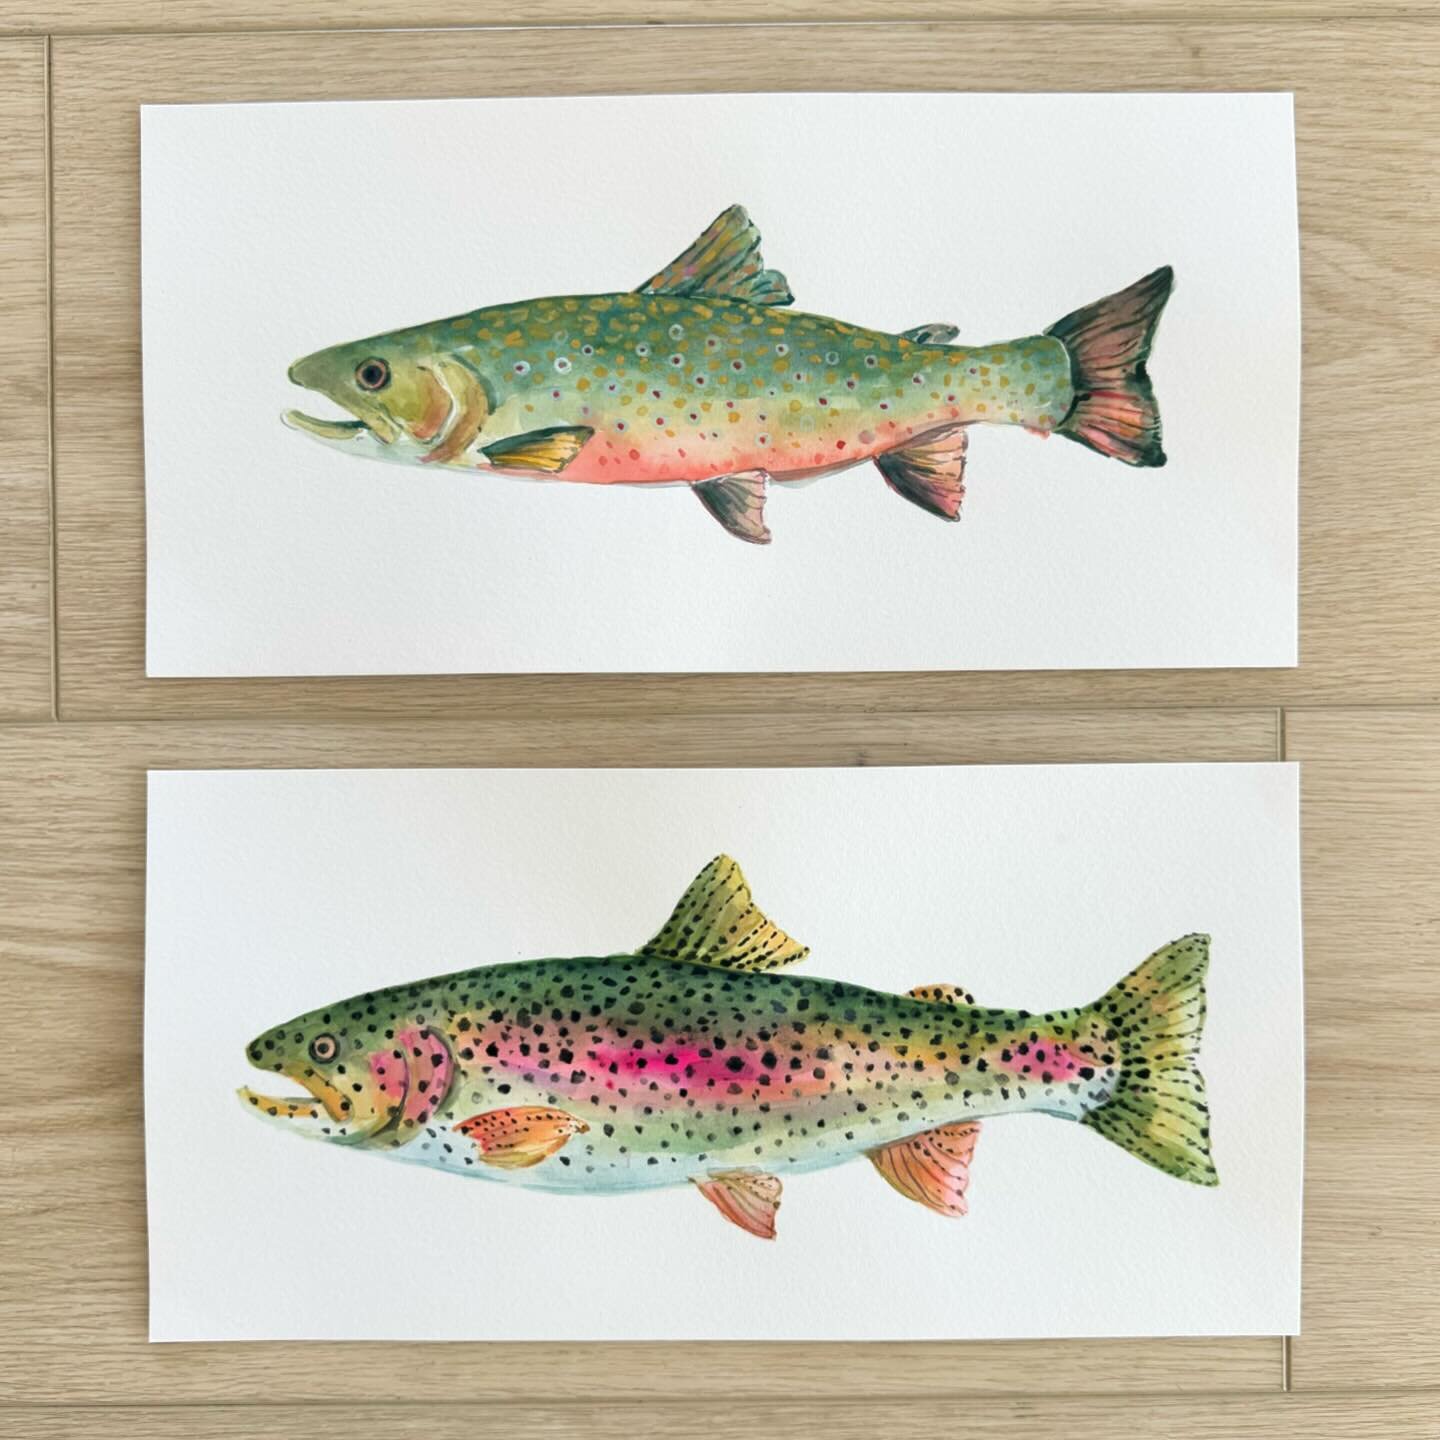 Celebrated the birthdays of two special guys in my life this weekend with paintings of their favorite things. 😆#brandonis40 #barronis3 #brooktrout #rainbowtrout